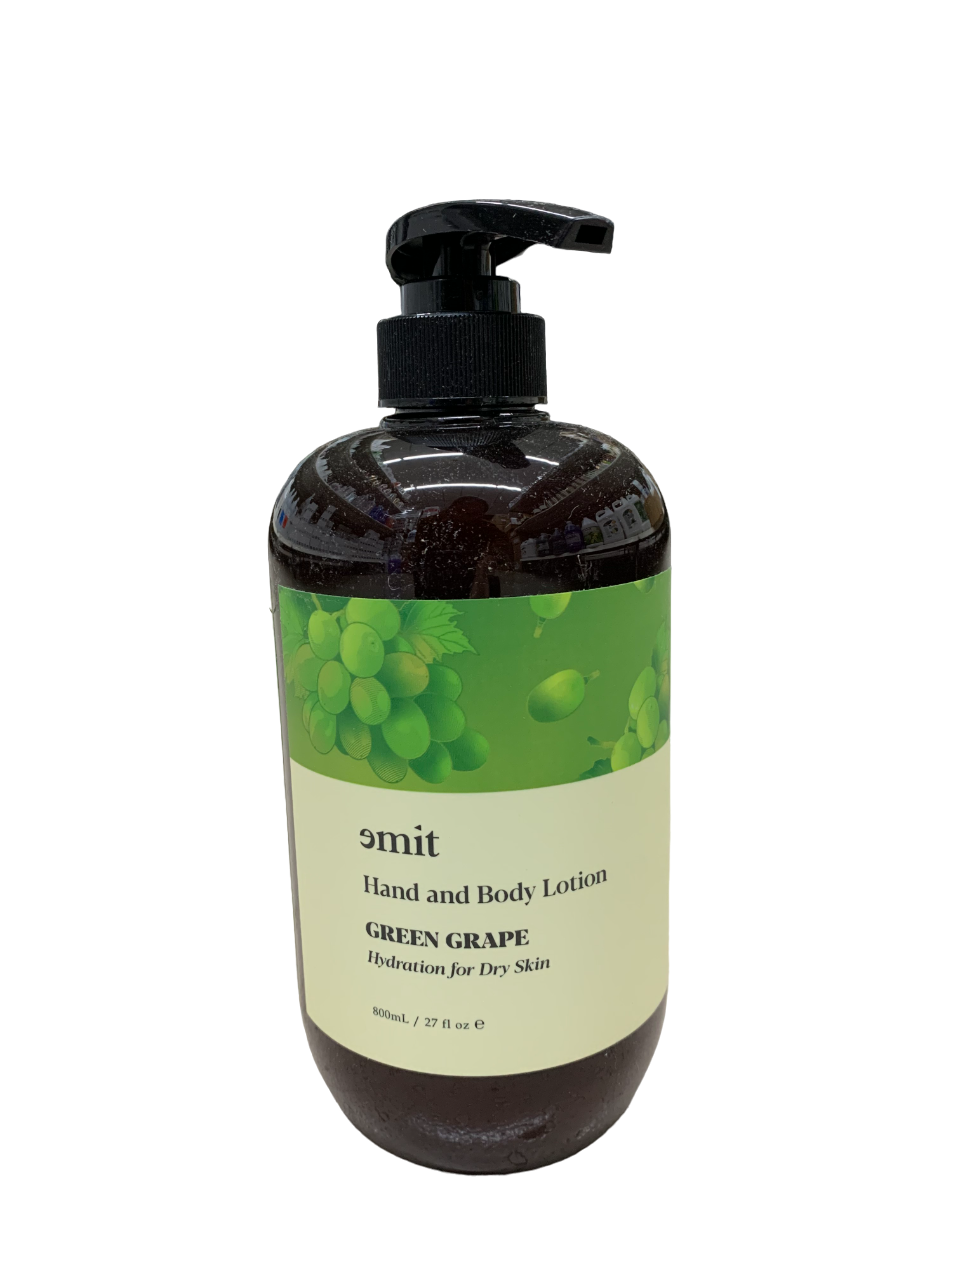 Emit Hand and Body Lotion Green Grape